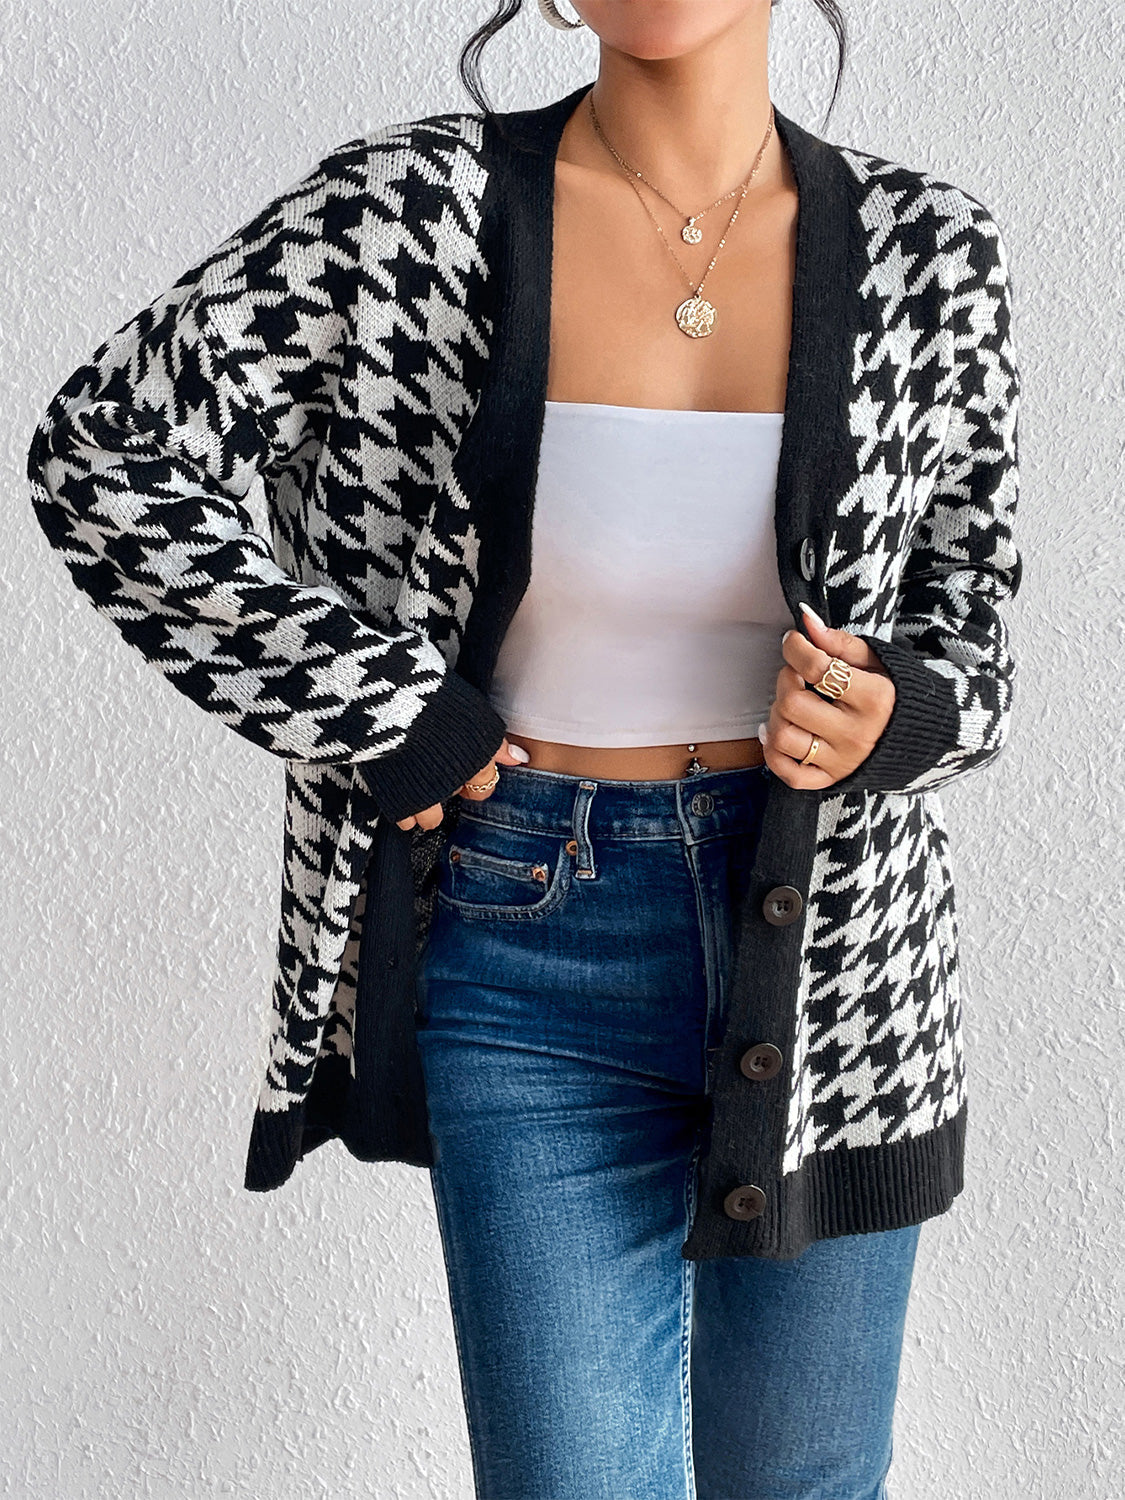 Houndstooth Button Down Cardigan - Black / S - Women’s Clothing & Accessories - Shirts & Tops - 1 - 2024